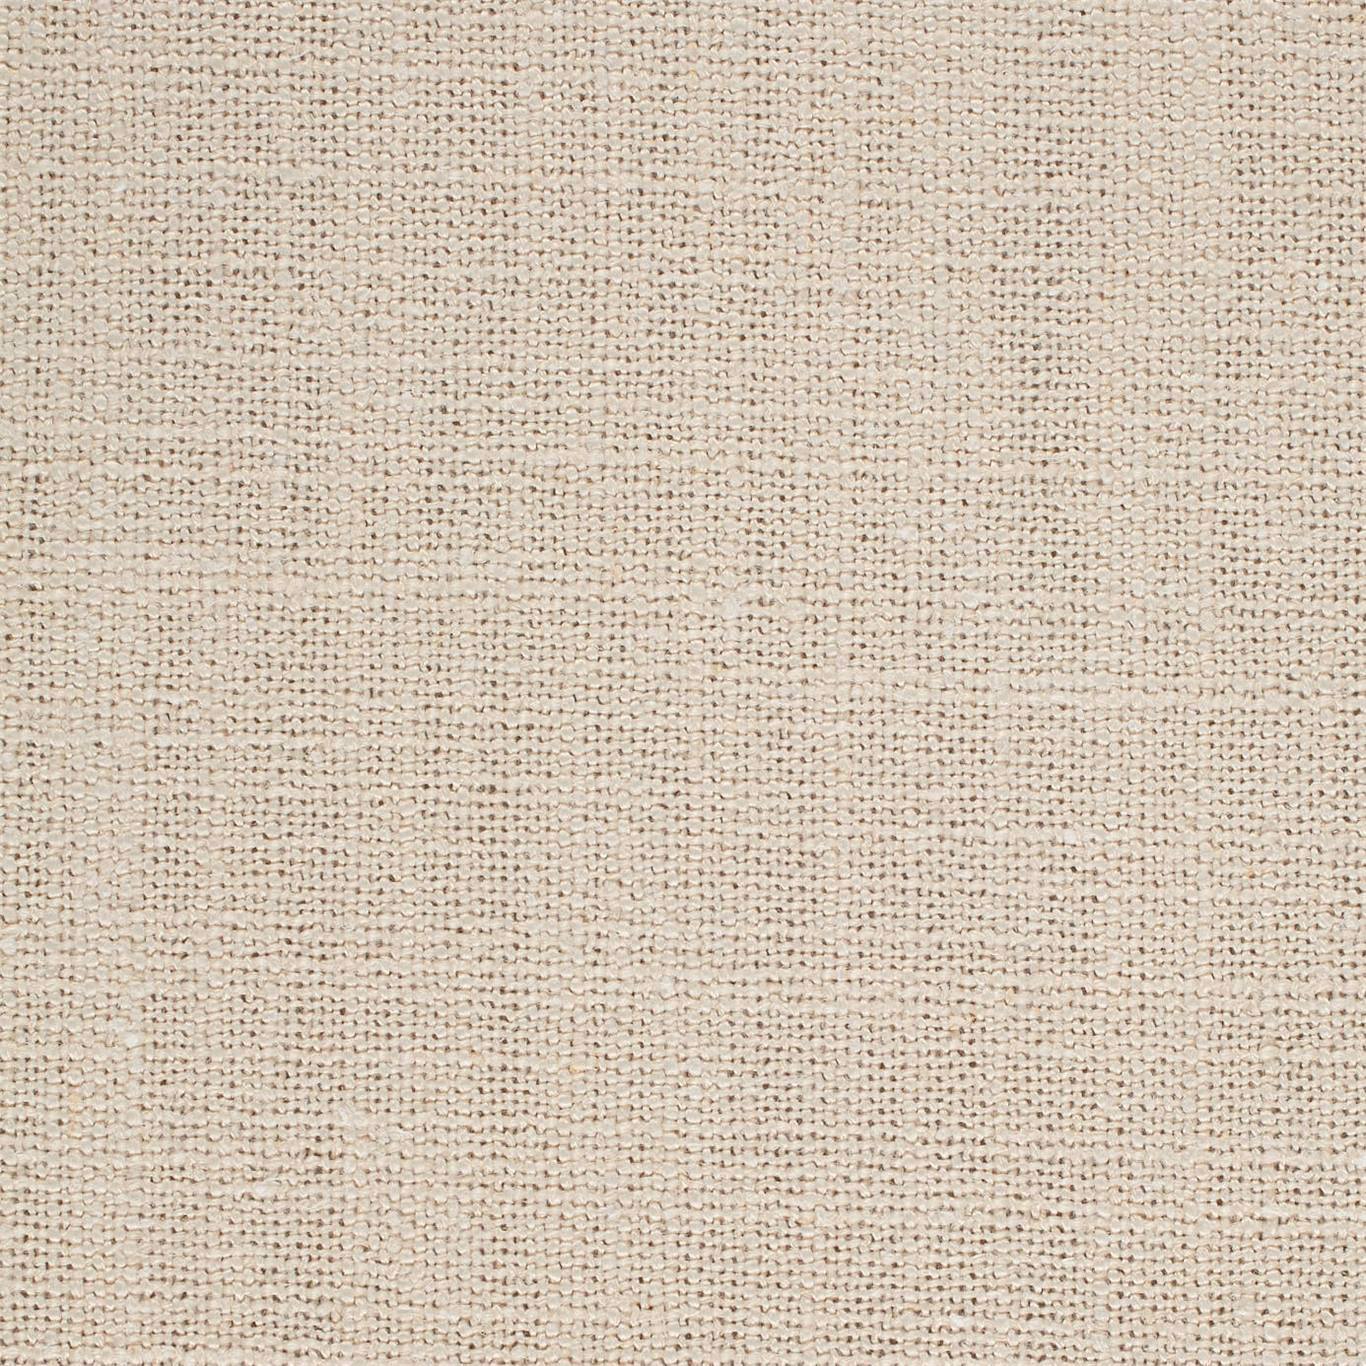 Lagom Natural Fabric by SAN